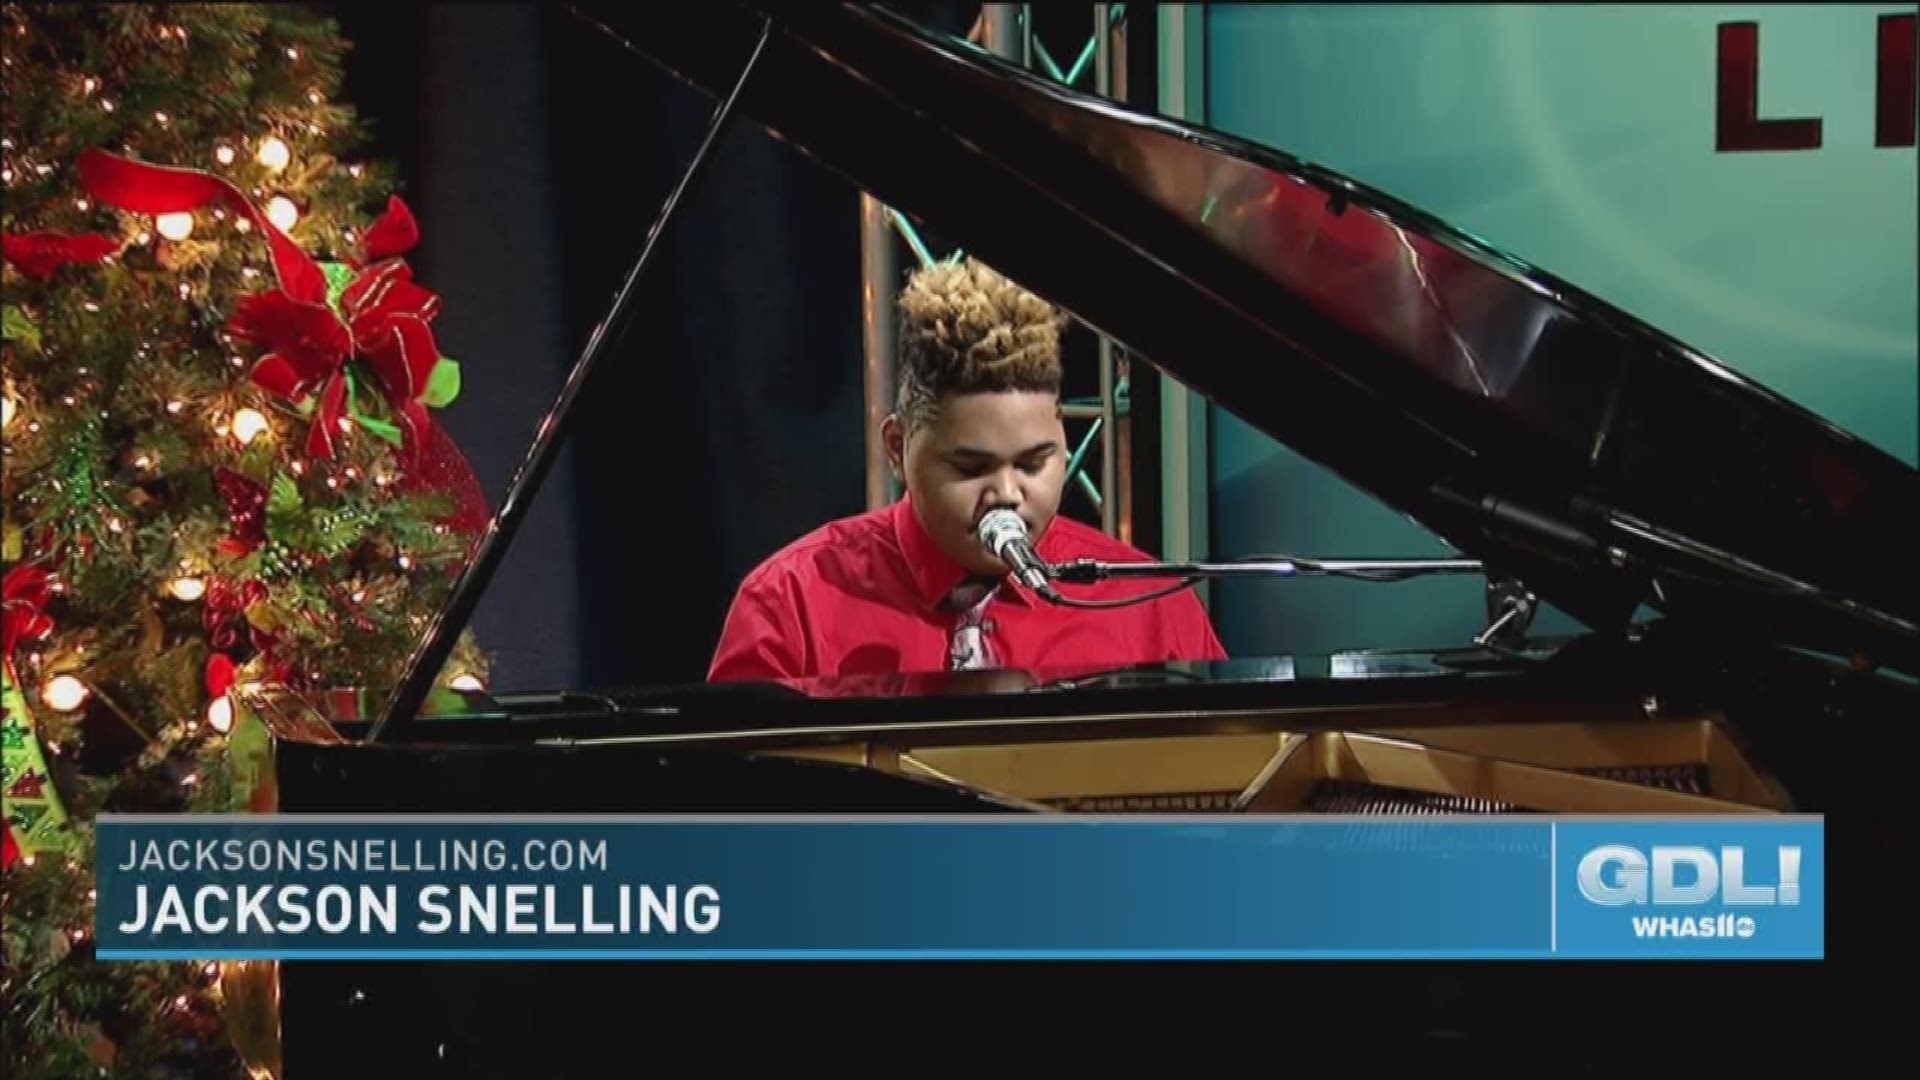 Singer-songwriter Jackson Snelling stopped by Great Day Live to sing a couple songs and talk about what he's been up to.